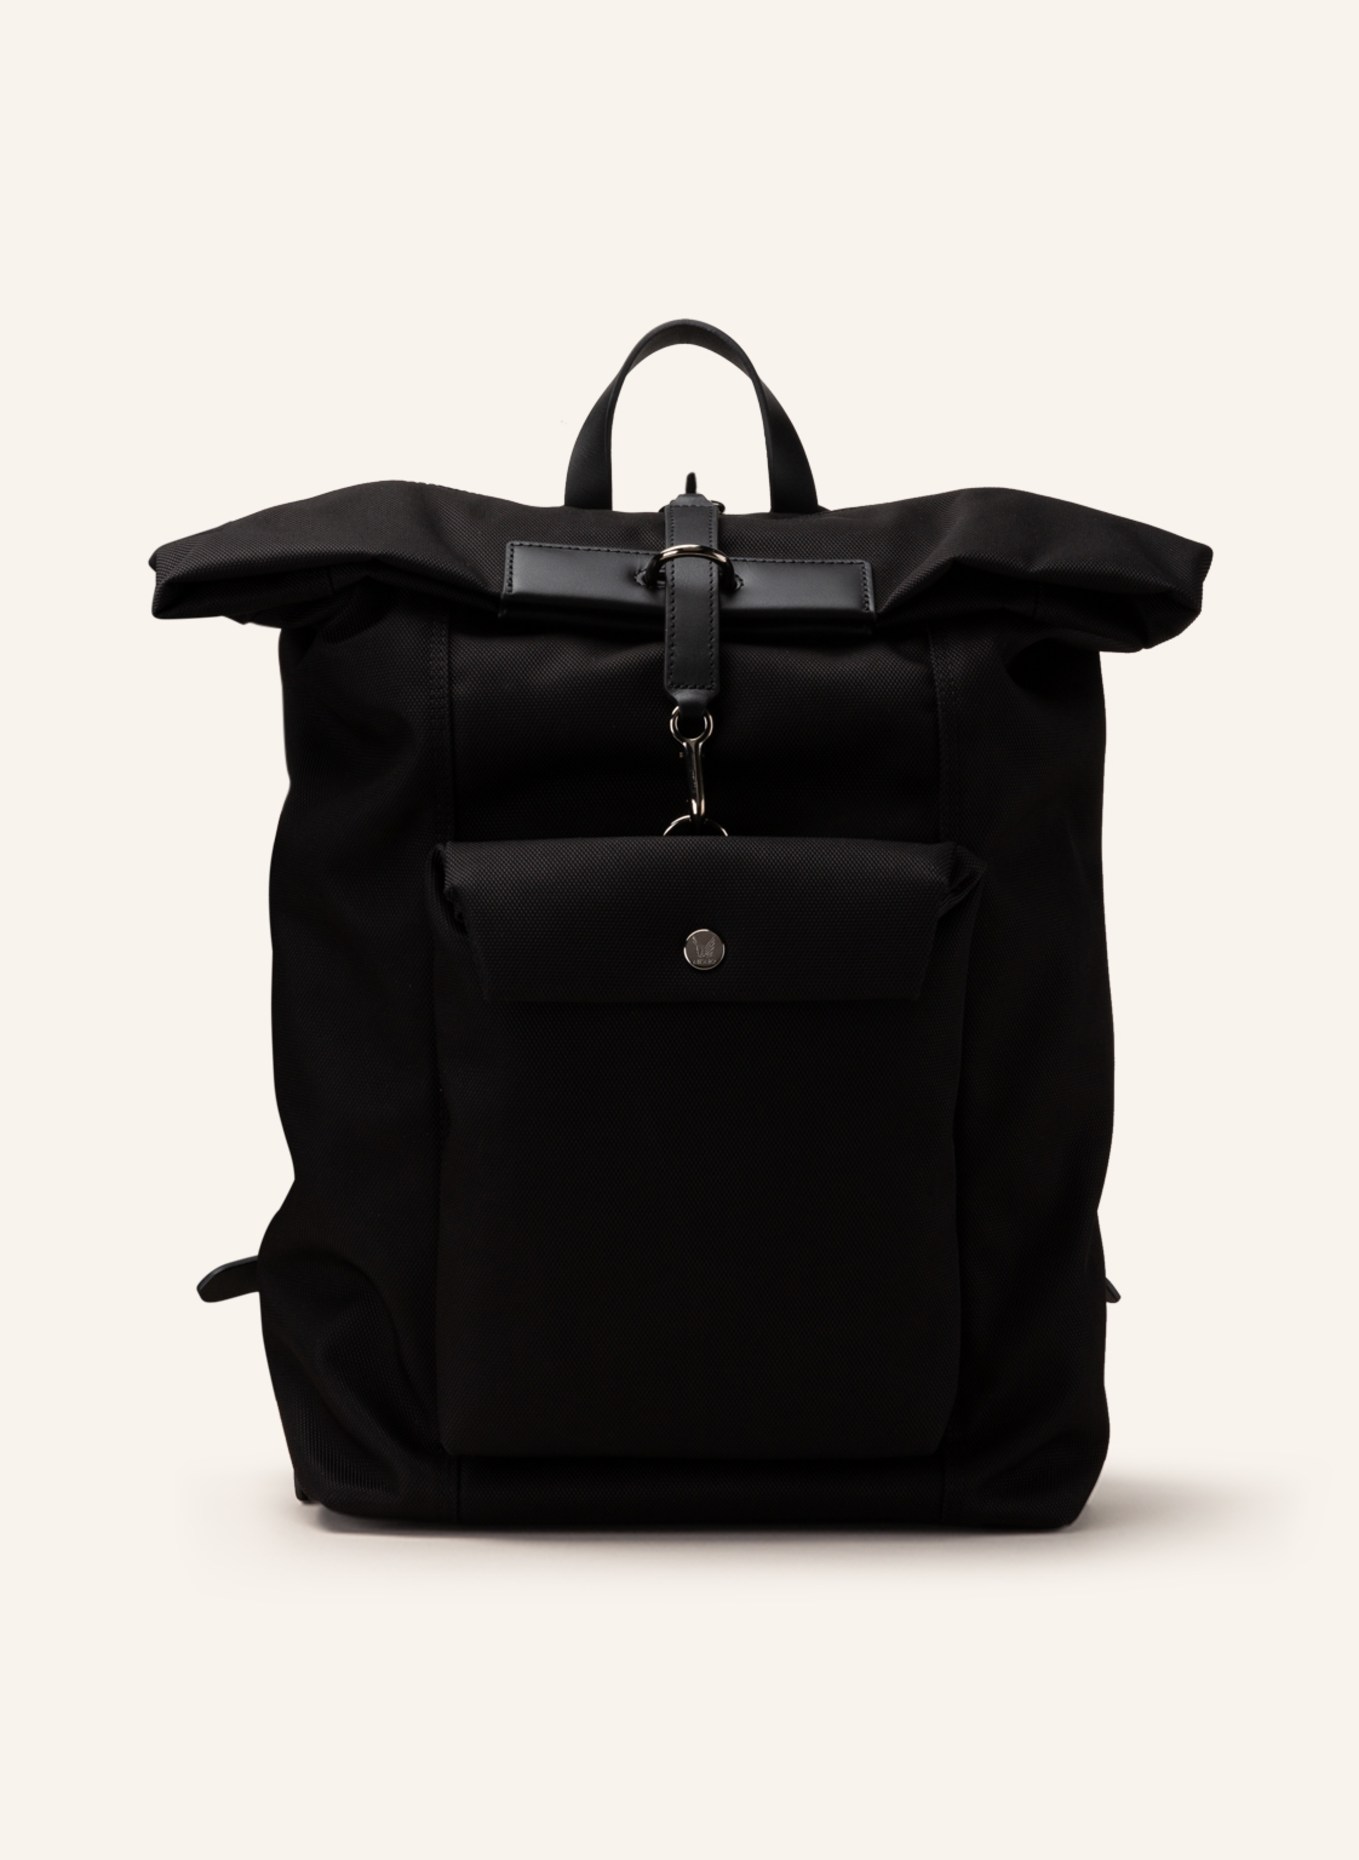 ¨MISMO WAXD RUCK . Backpack . Escape